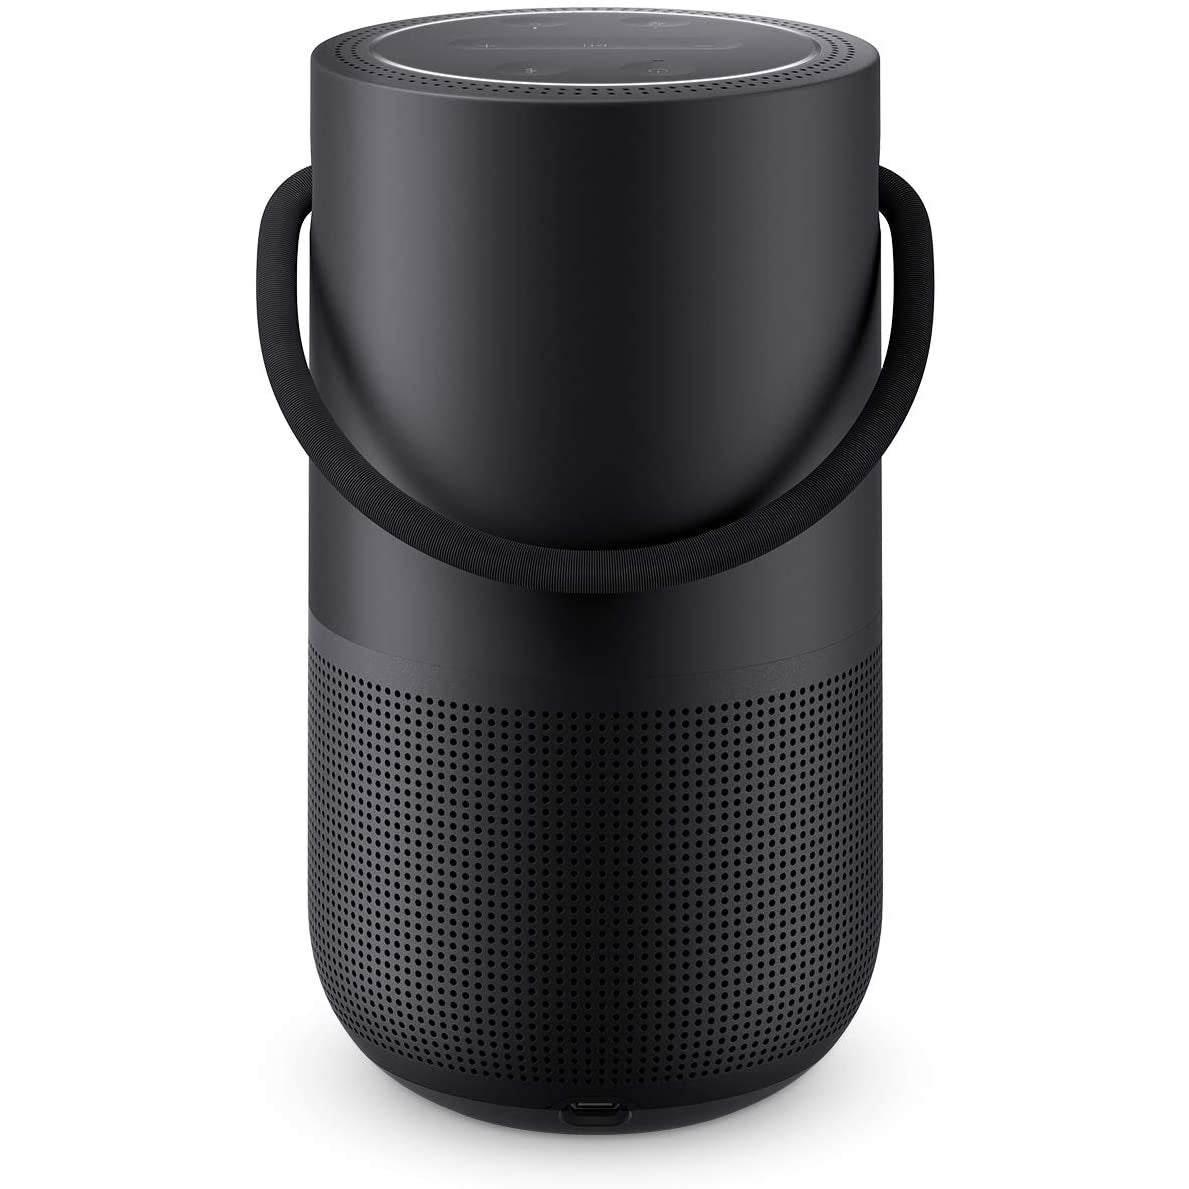 Bose Portable Home Smart Speaker with Voice Recognition and Control - Black - Refurbished Pristine